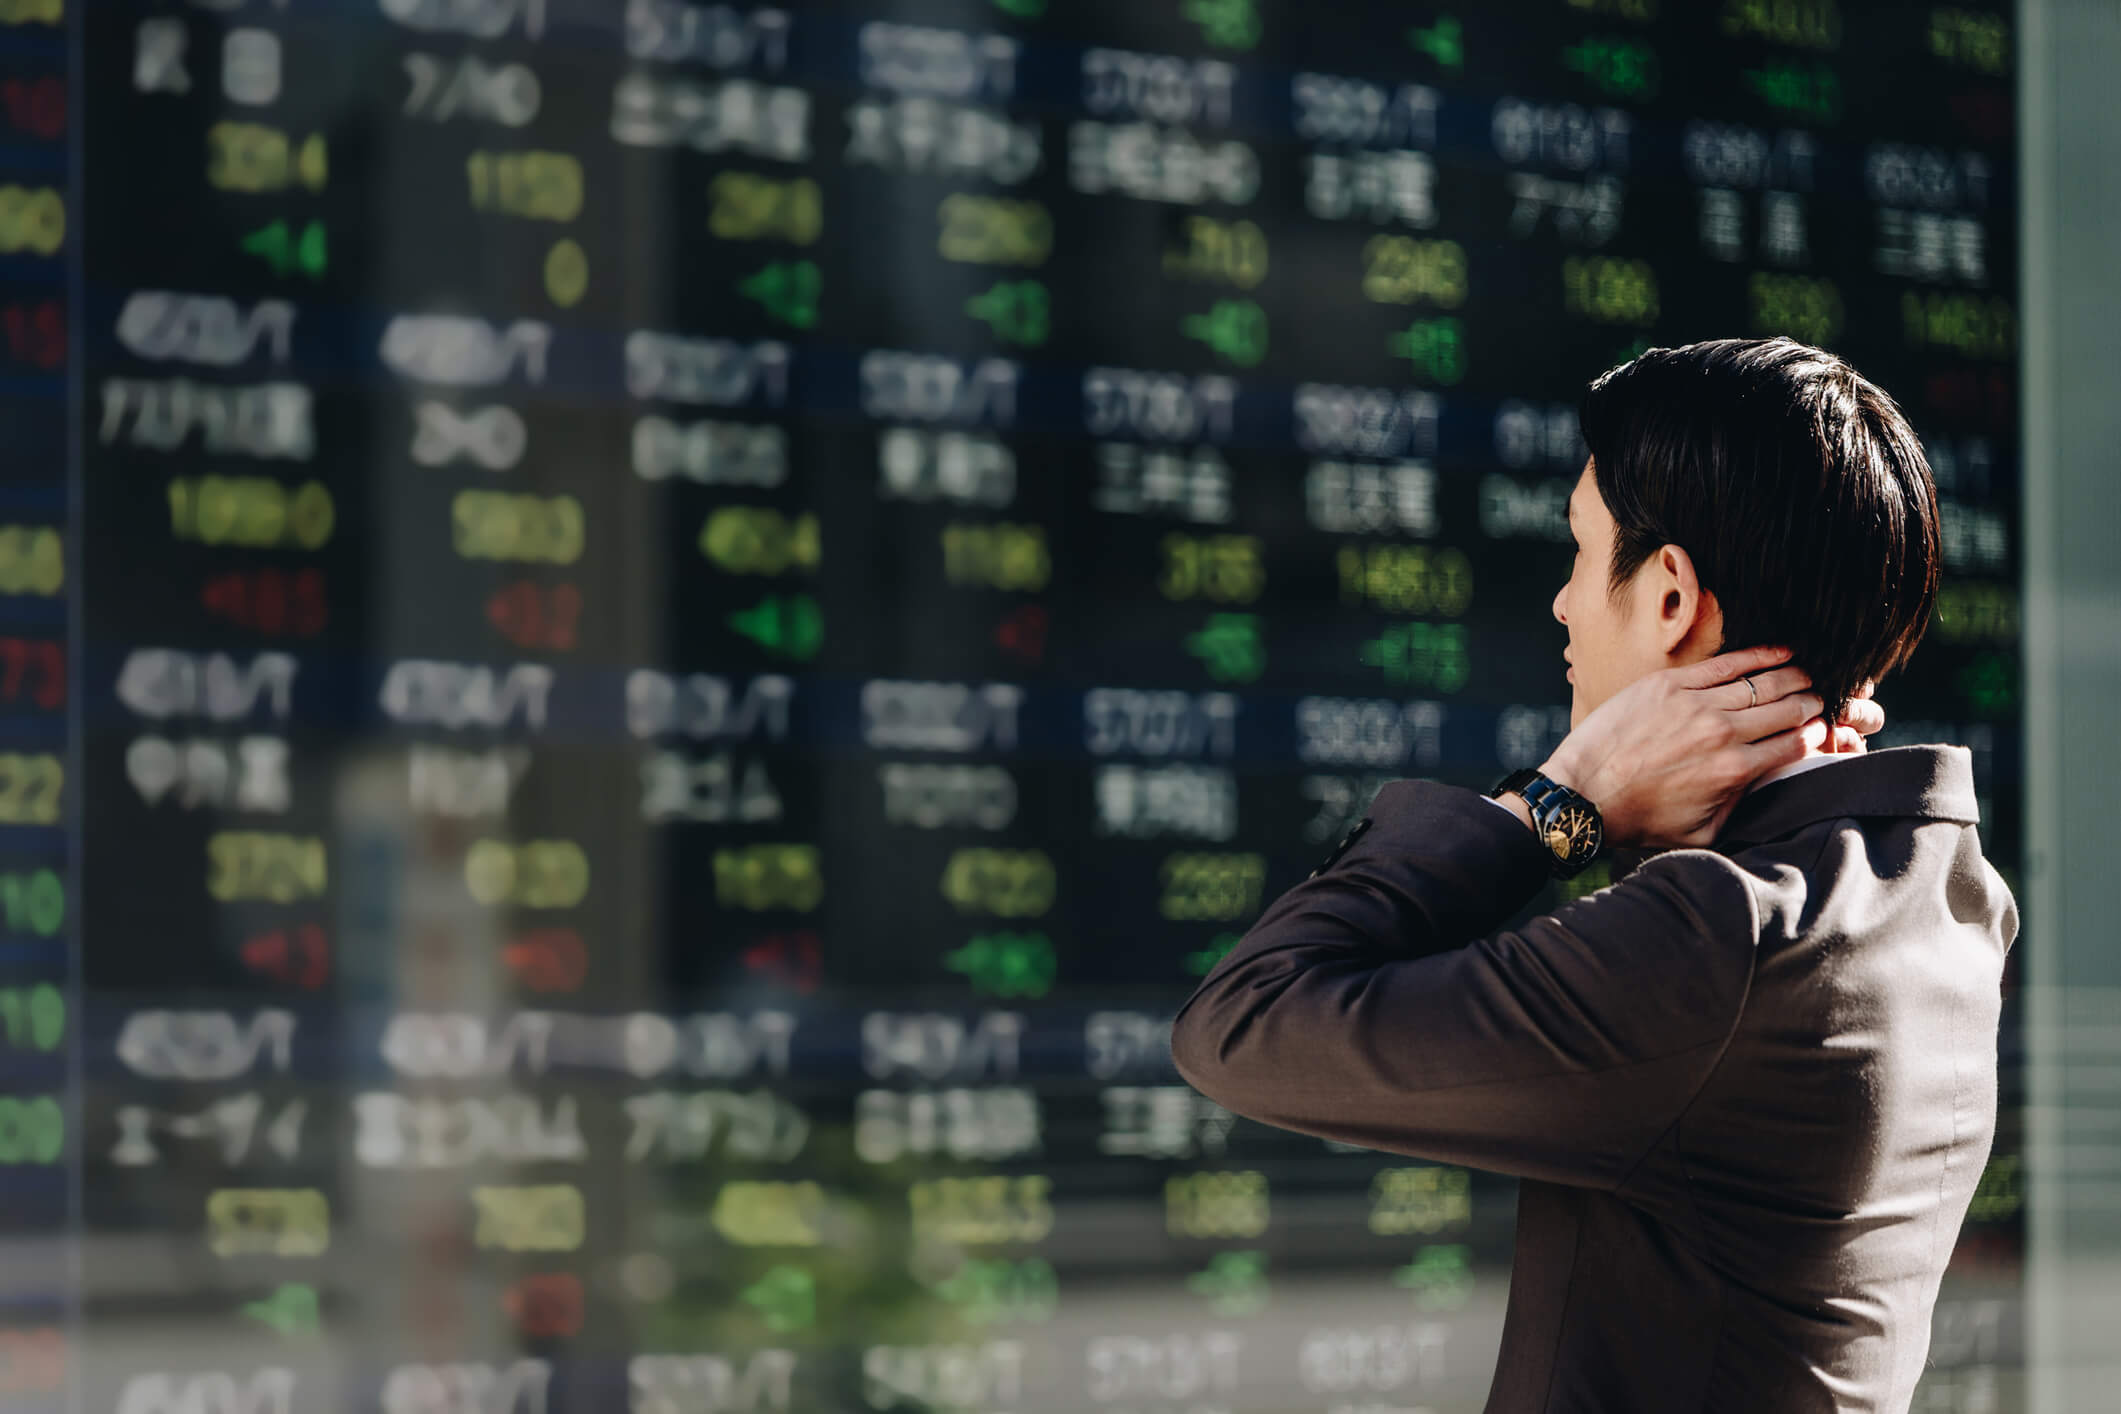 A man looking at stock prices on a large board